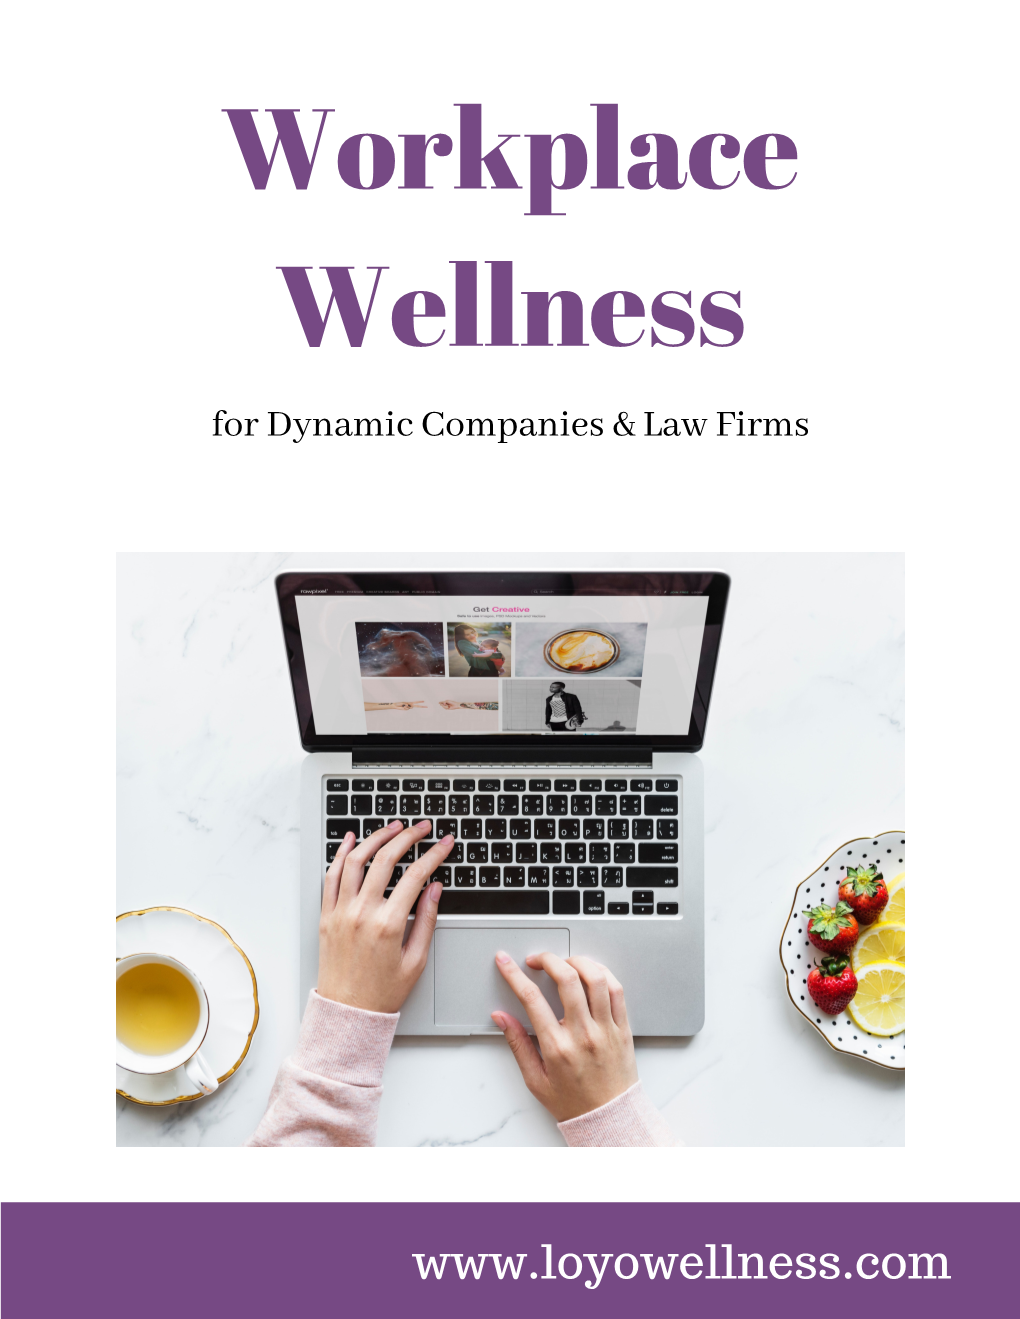 Workplace Wellness for Dynamic Companies & Law Firms